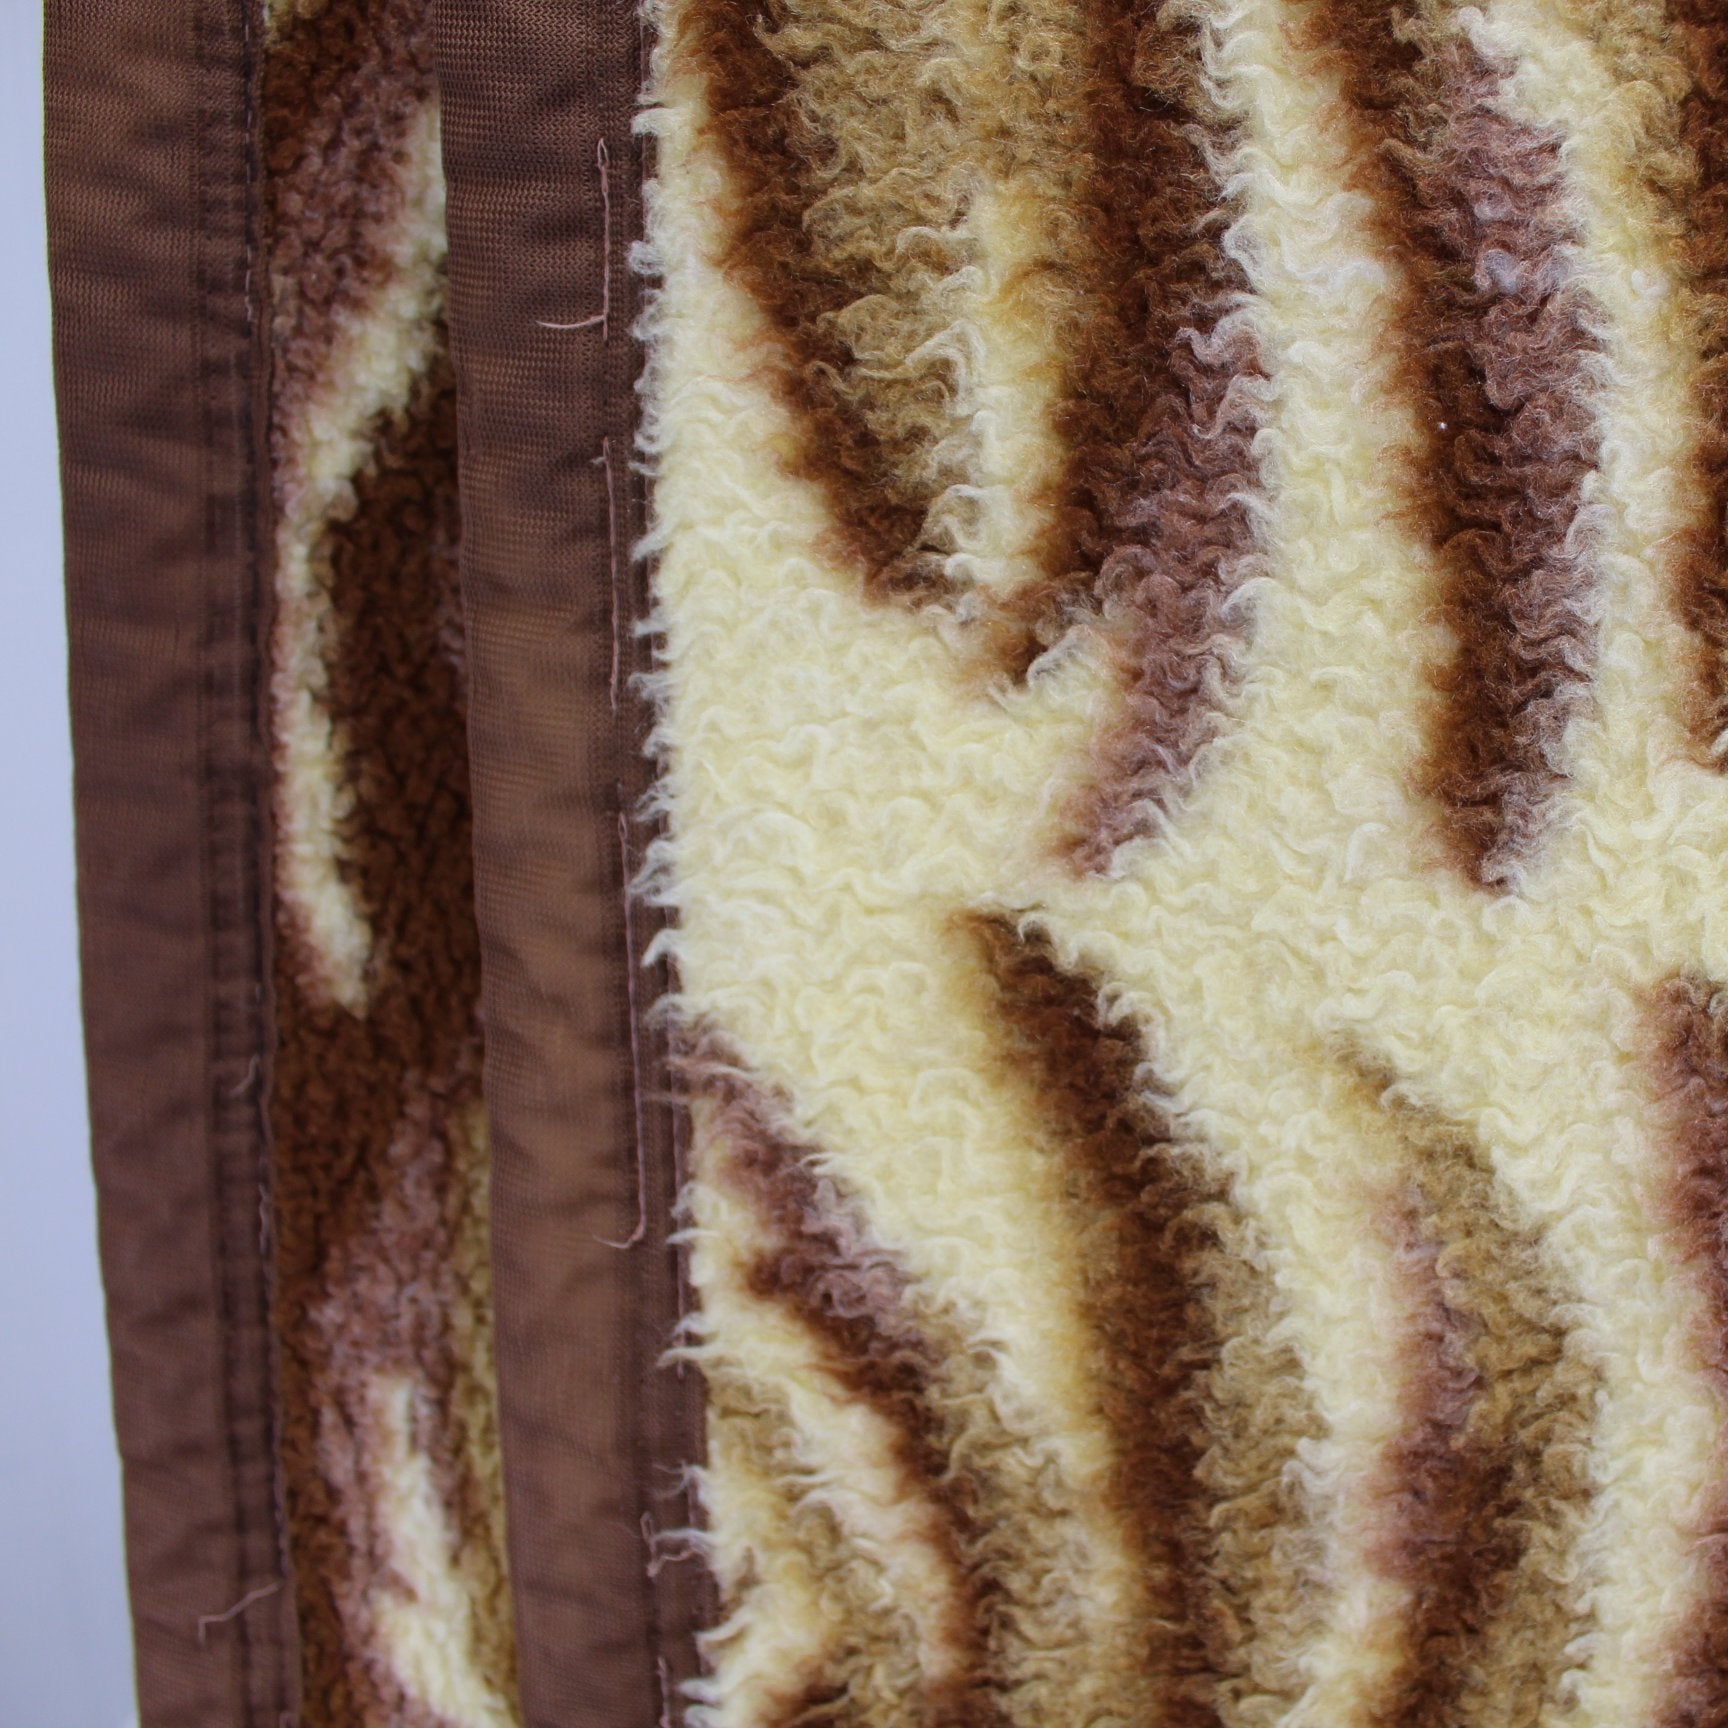 Heavy Poly Acrylic Blanket Large Fern Leaves Shades of Brown Cream 90" X 77" closeup view fluffy nap